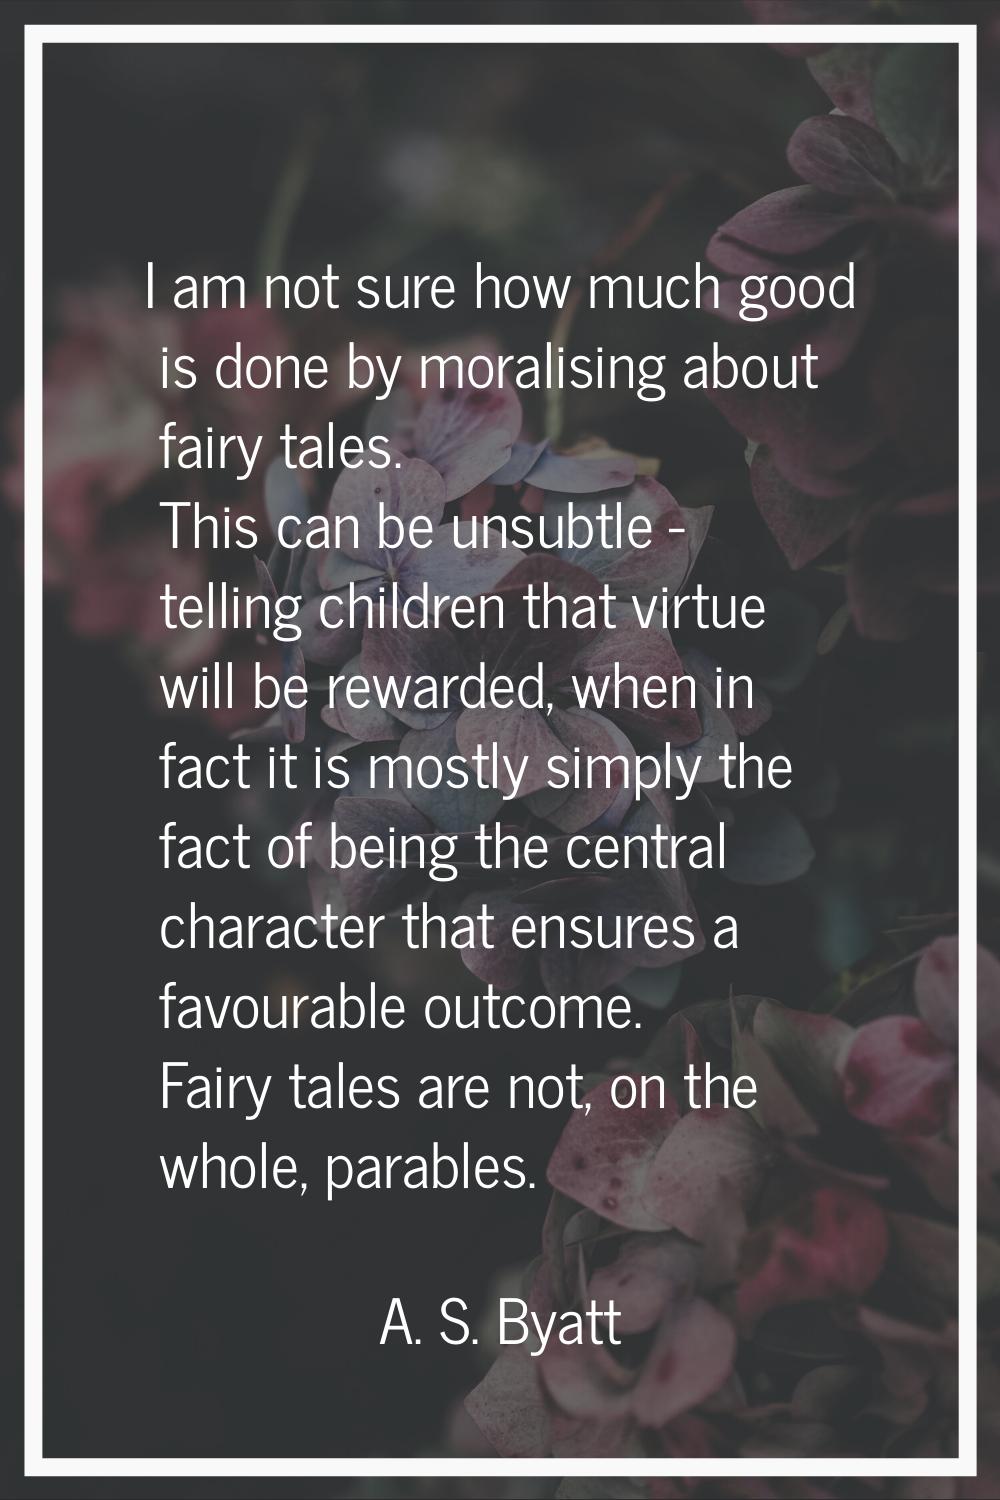 I am not sure how much good is done by moralising about fairy tales. This can be unsubtle - telling